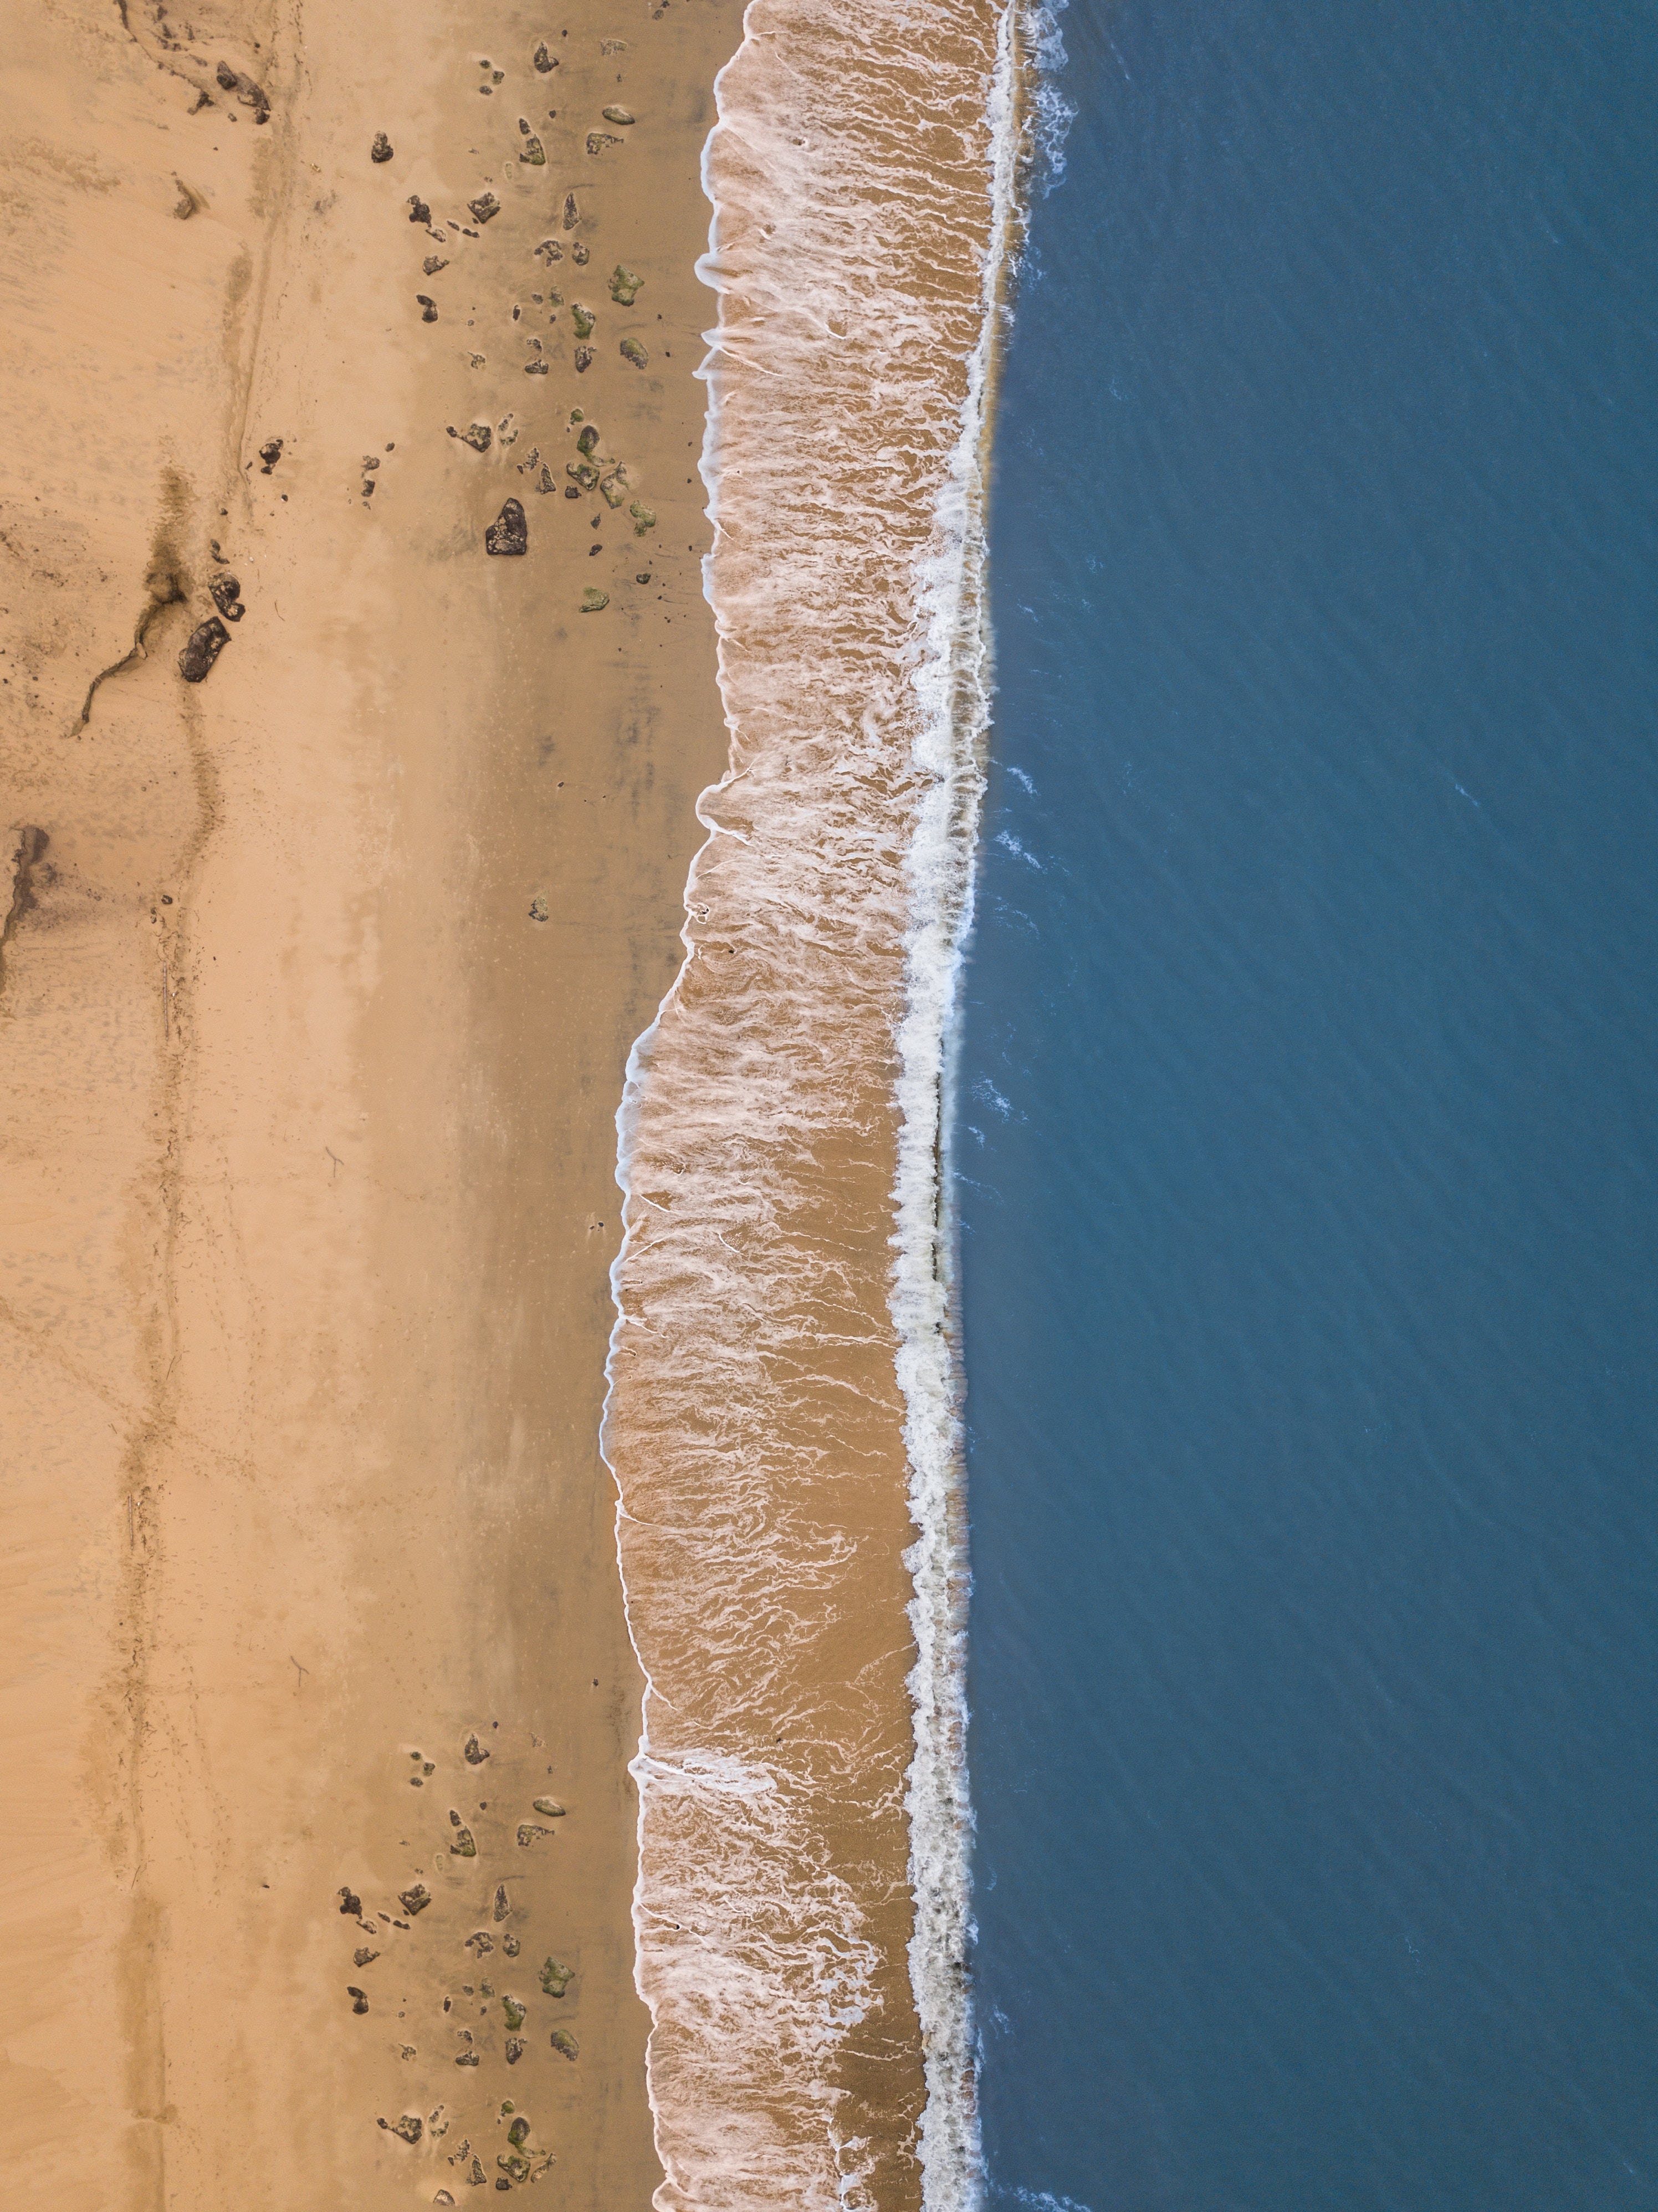 nature, sea, beach, sand, view from above, surf, wave lock screen backgrounds